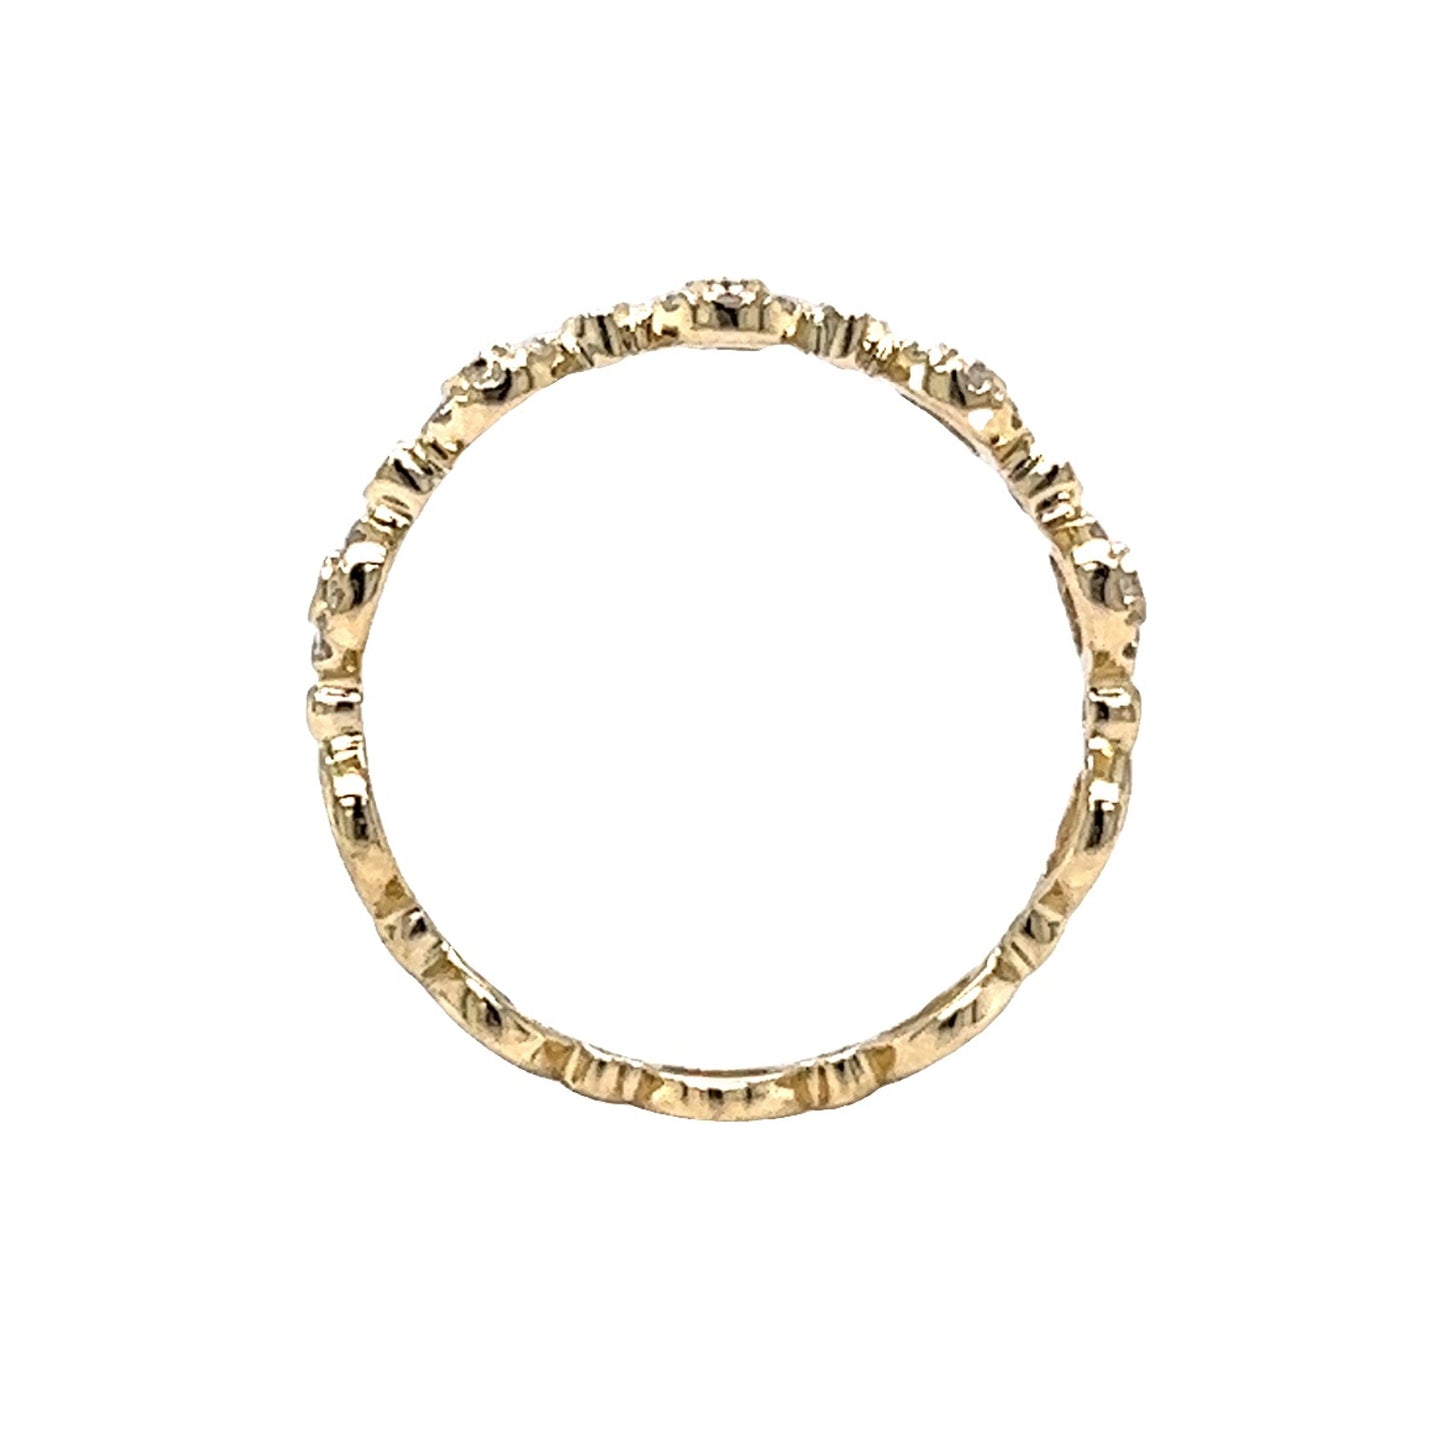 .28 Round Brilliant Diamond Stacking Ring in 14k Yellow Gold